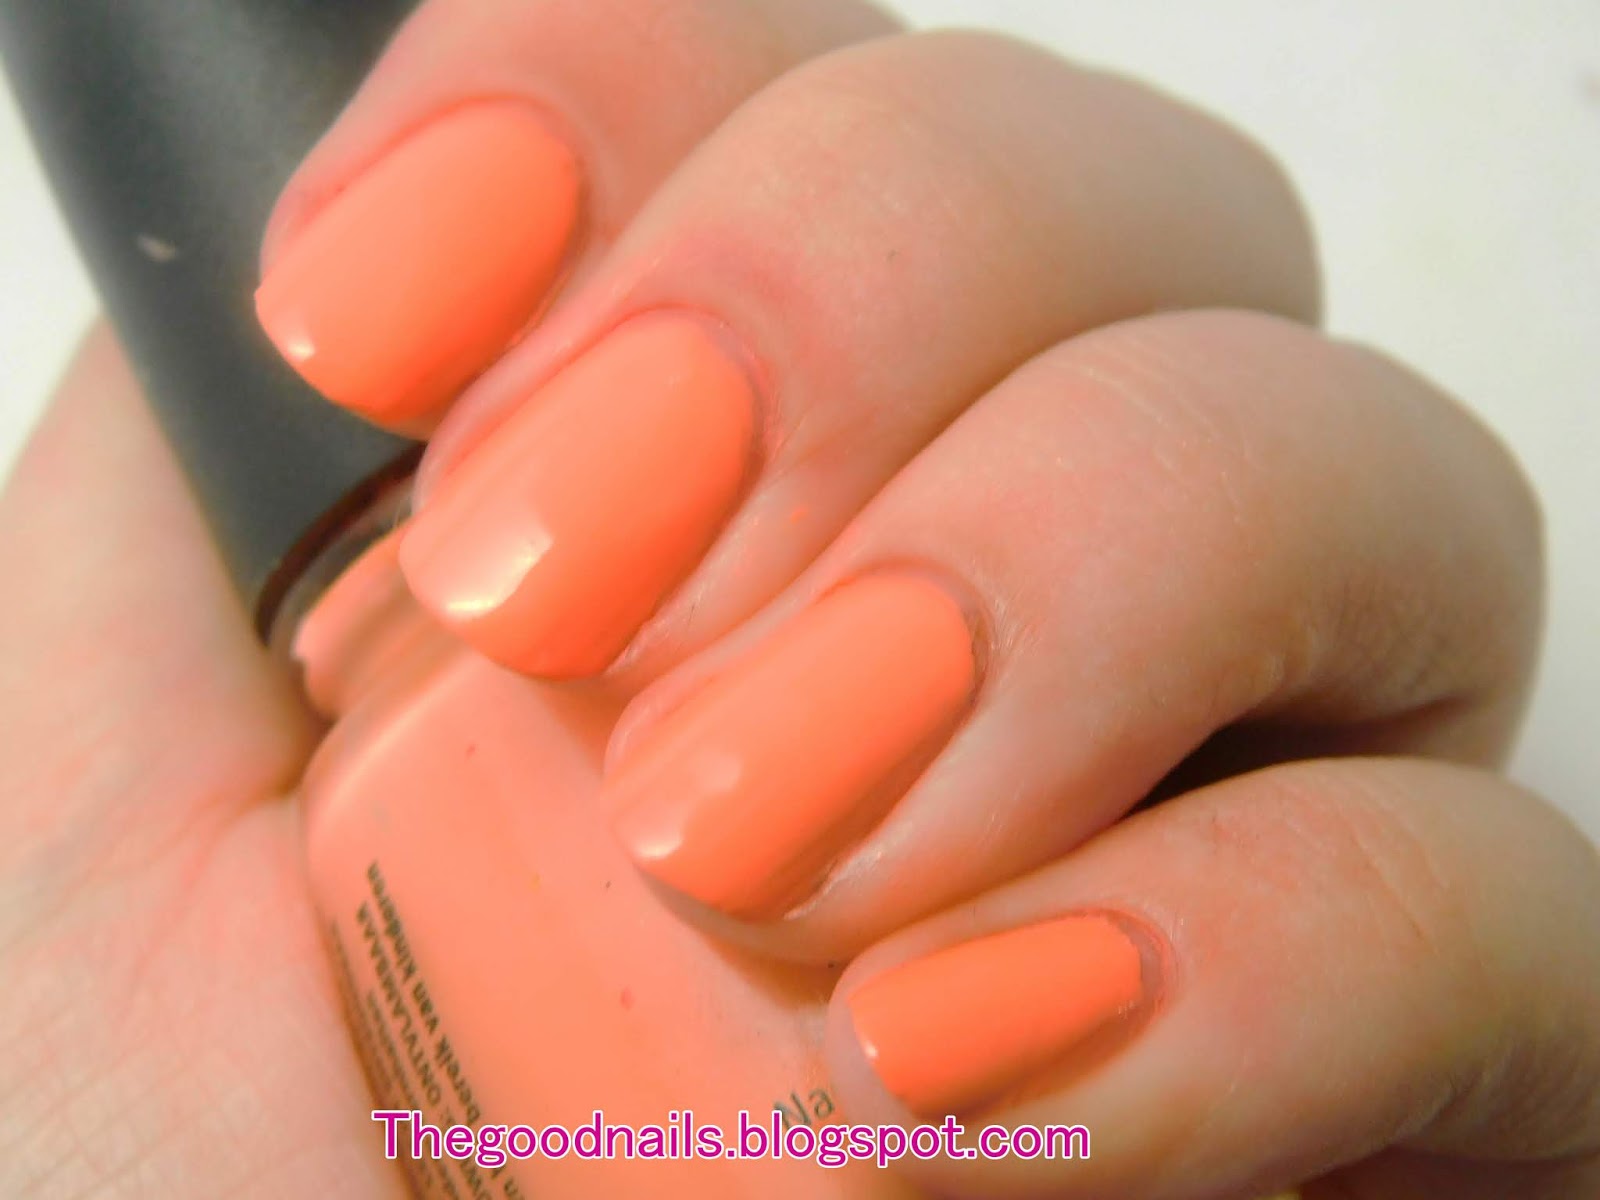 Bliss Nail Polish in "Peachy Keen" - wide 2